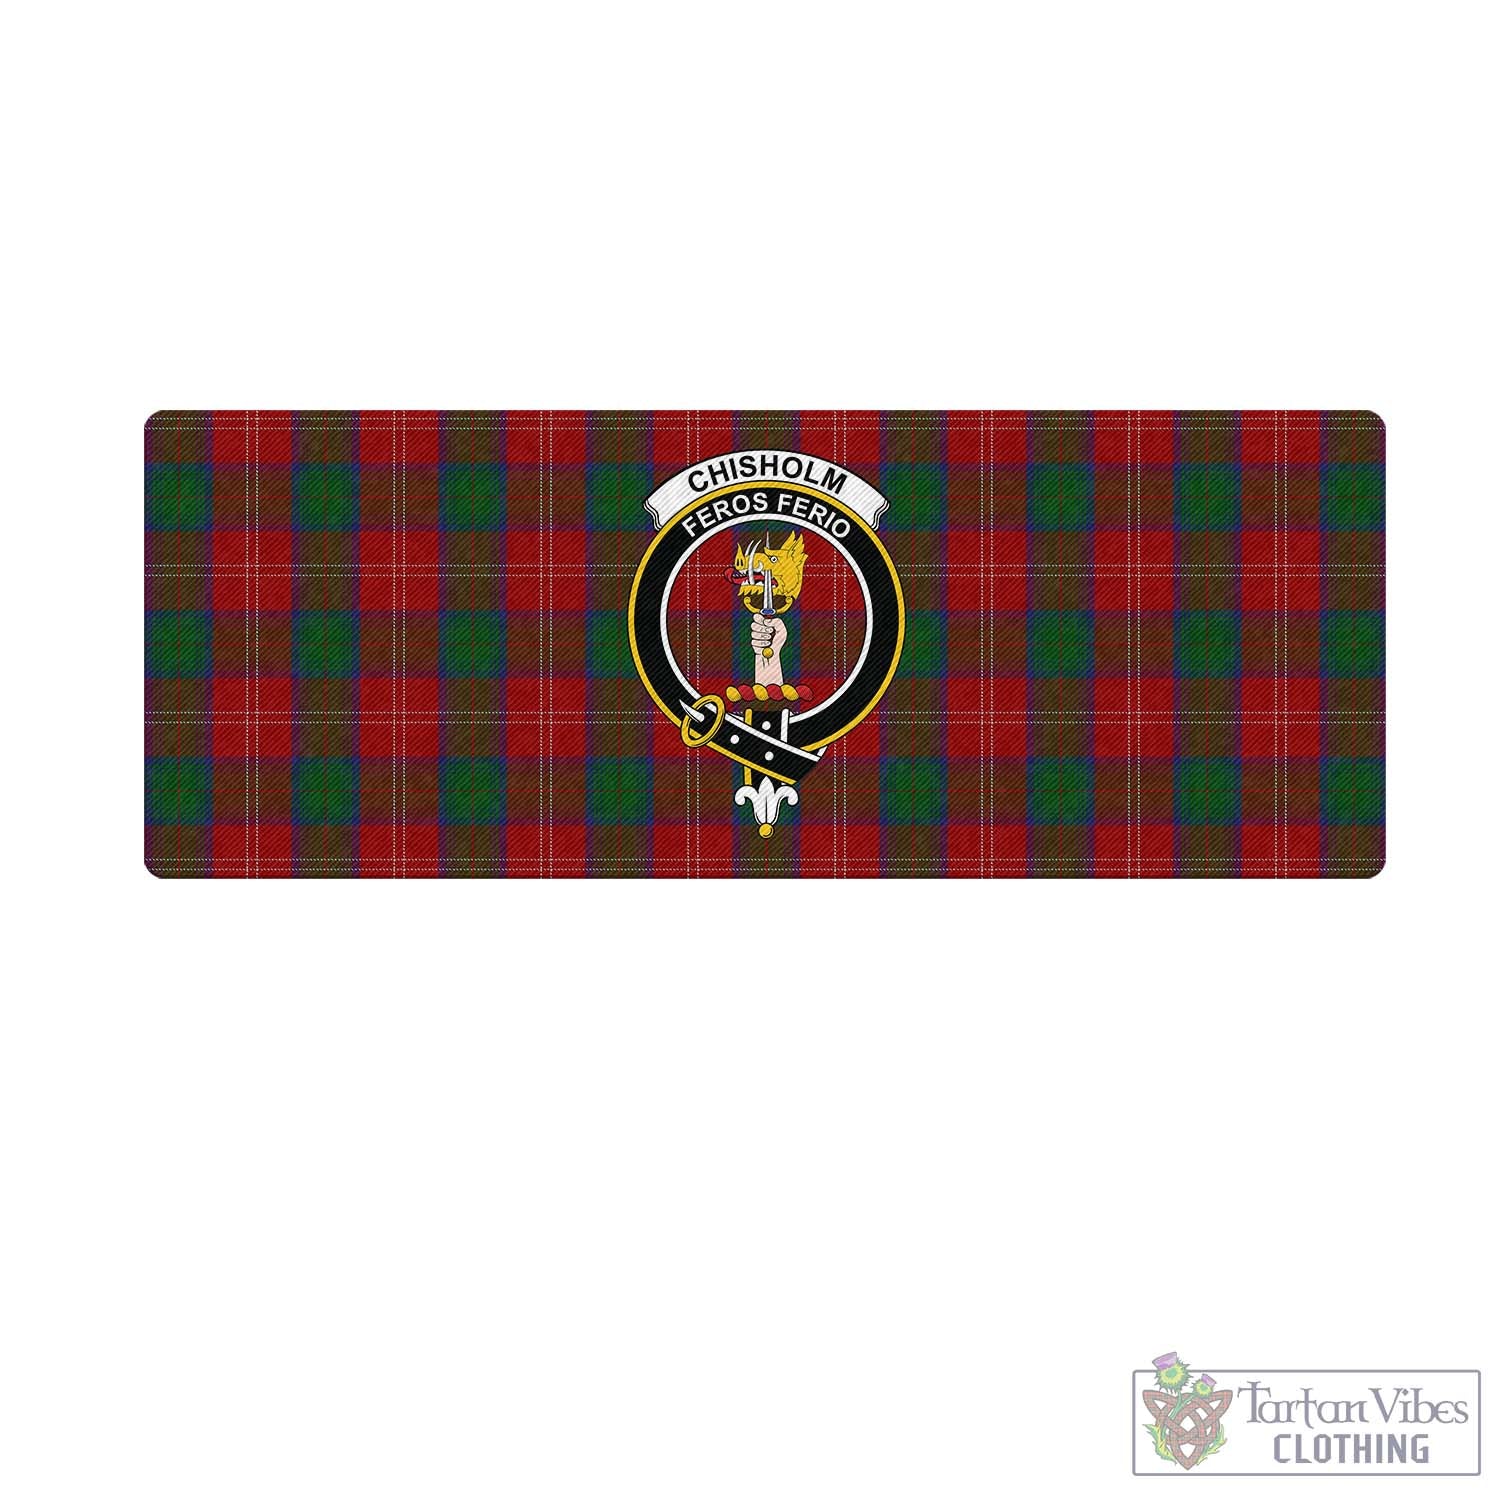 Tartan Vibes Clothing Chisholm Tartan Mouse Pad with Family Crest